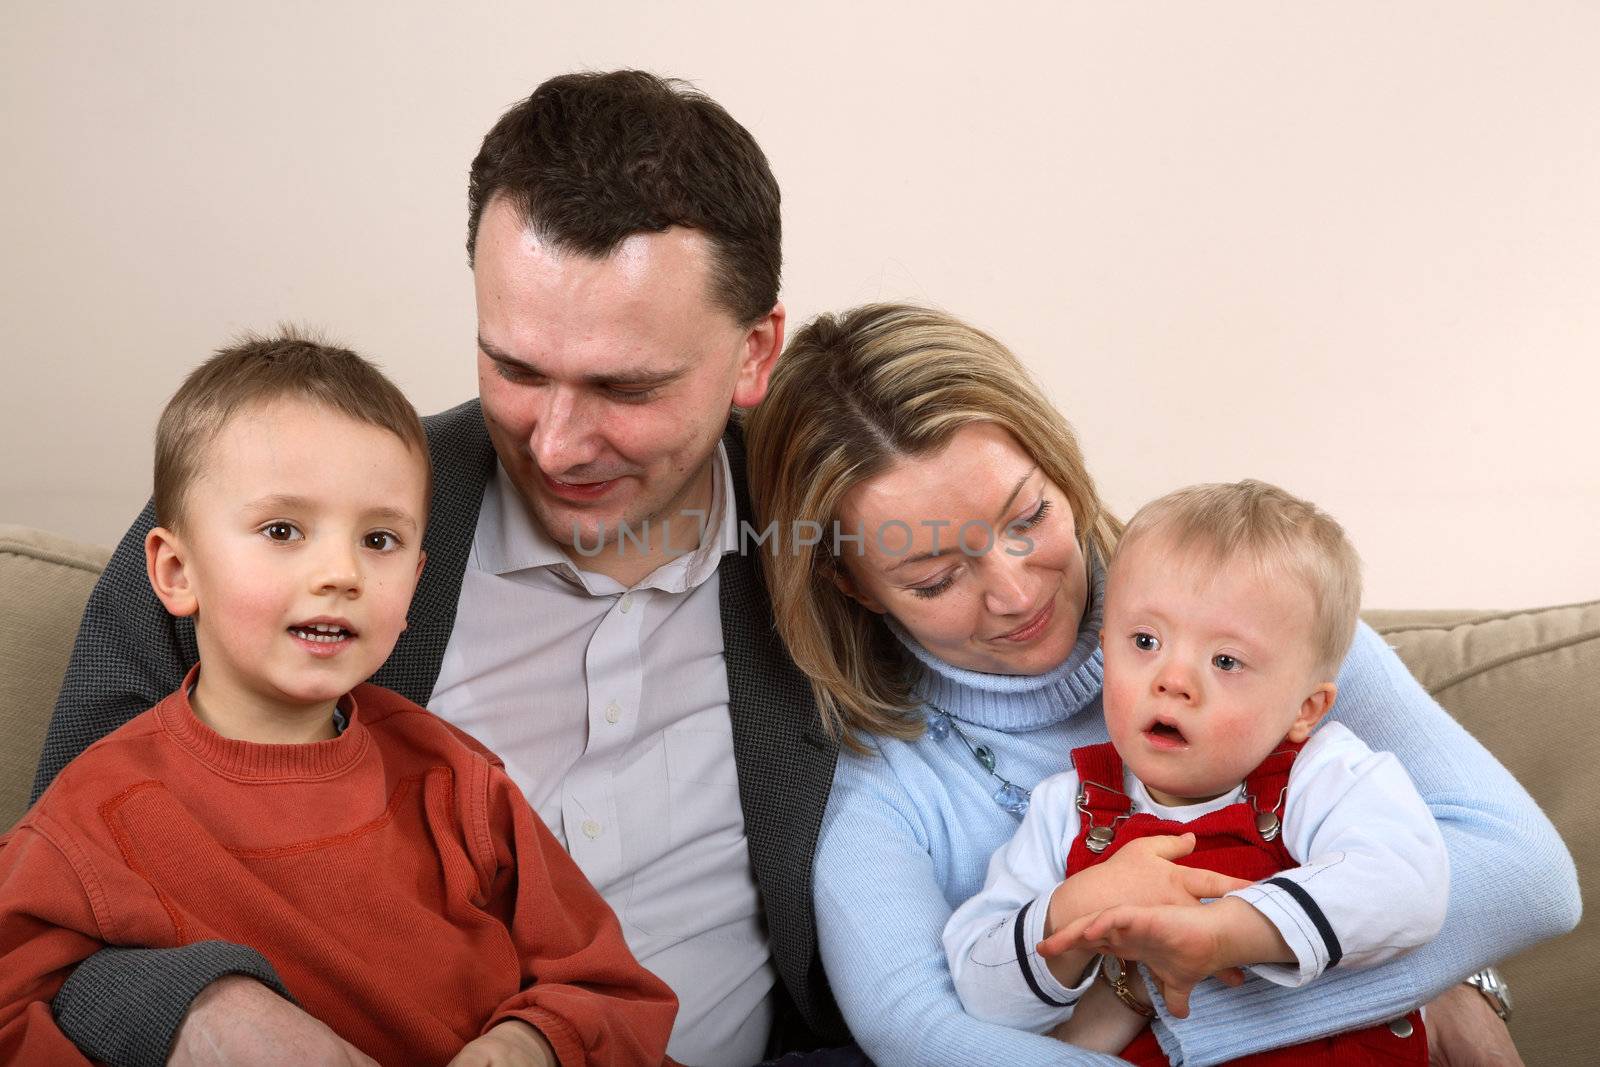 A family portrait of a mother and father sitting on a couch with their two young boys.  One boy has Down Syndrome.